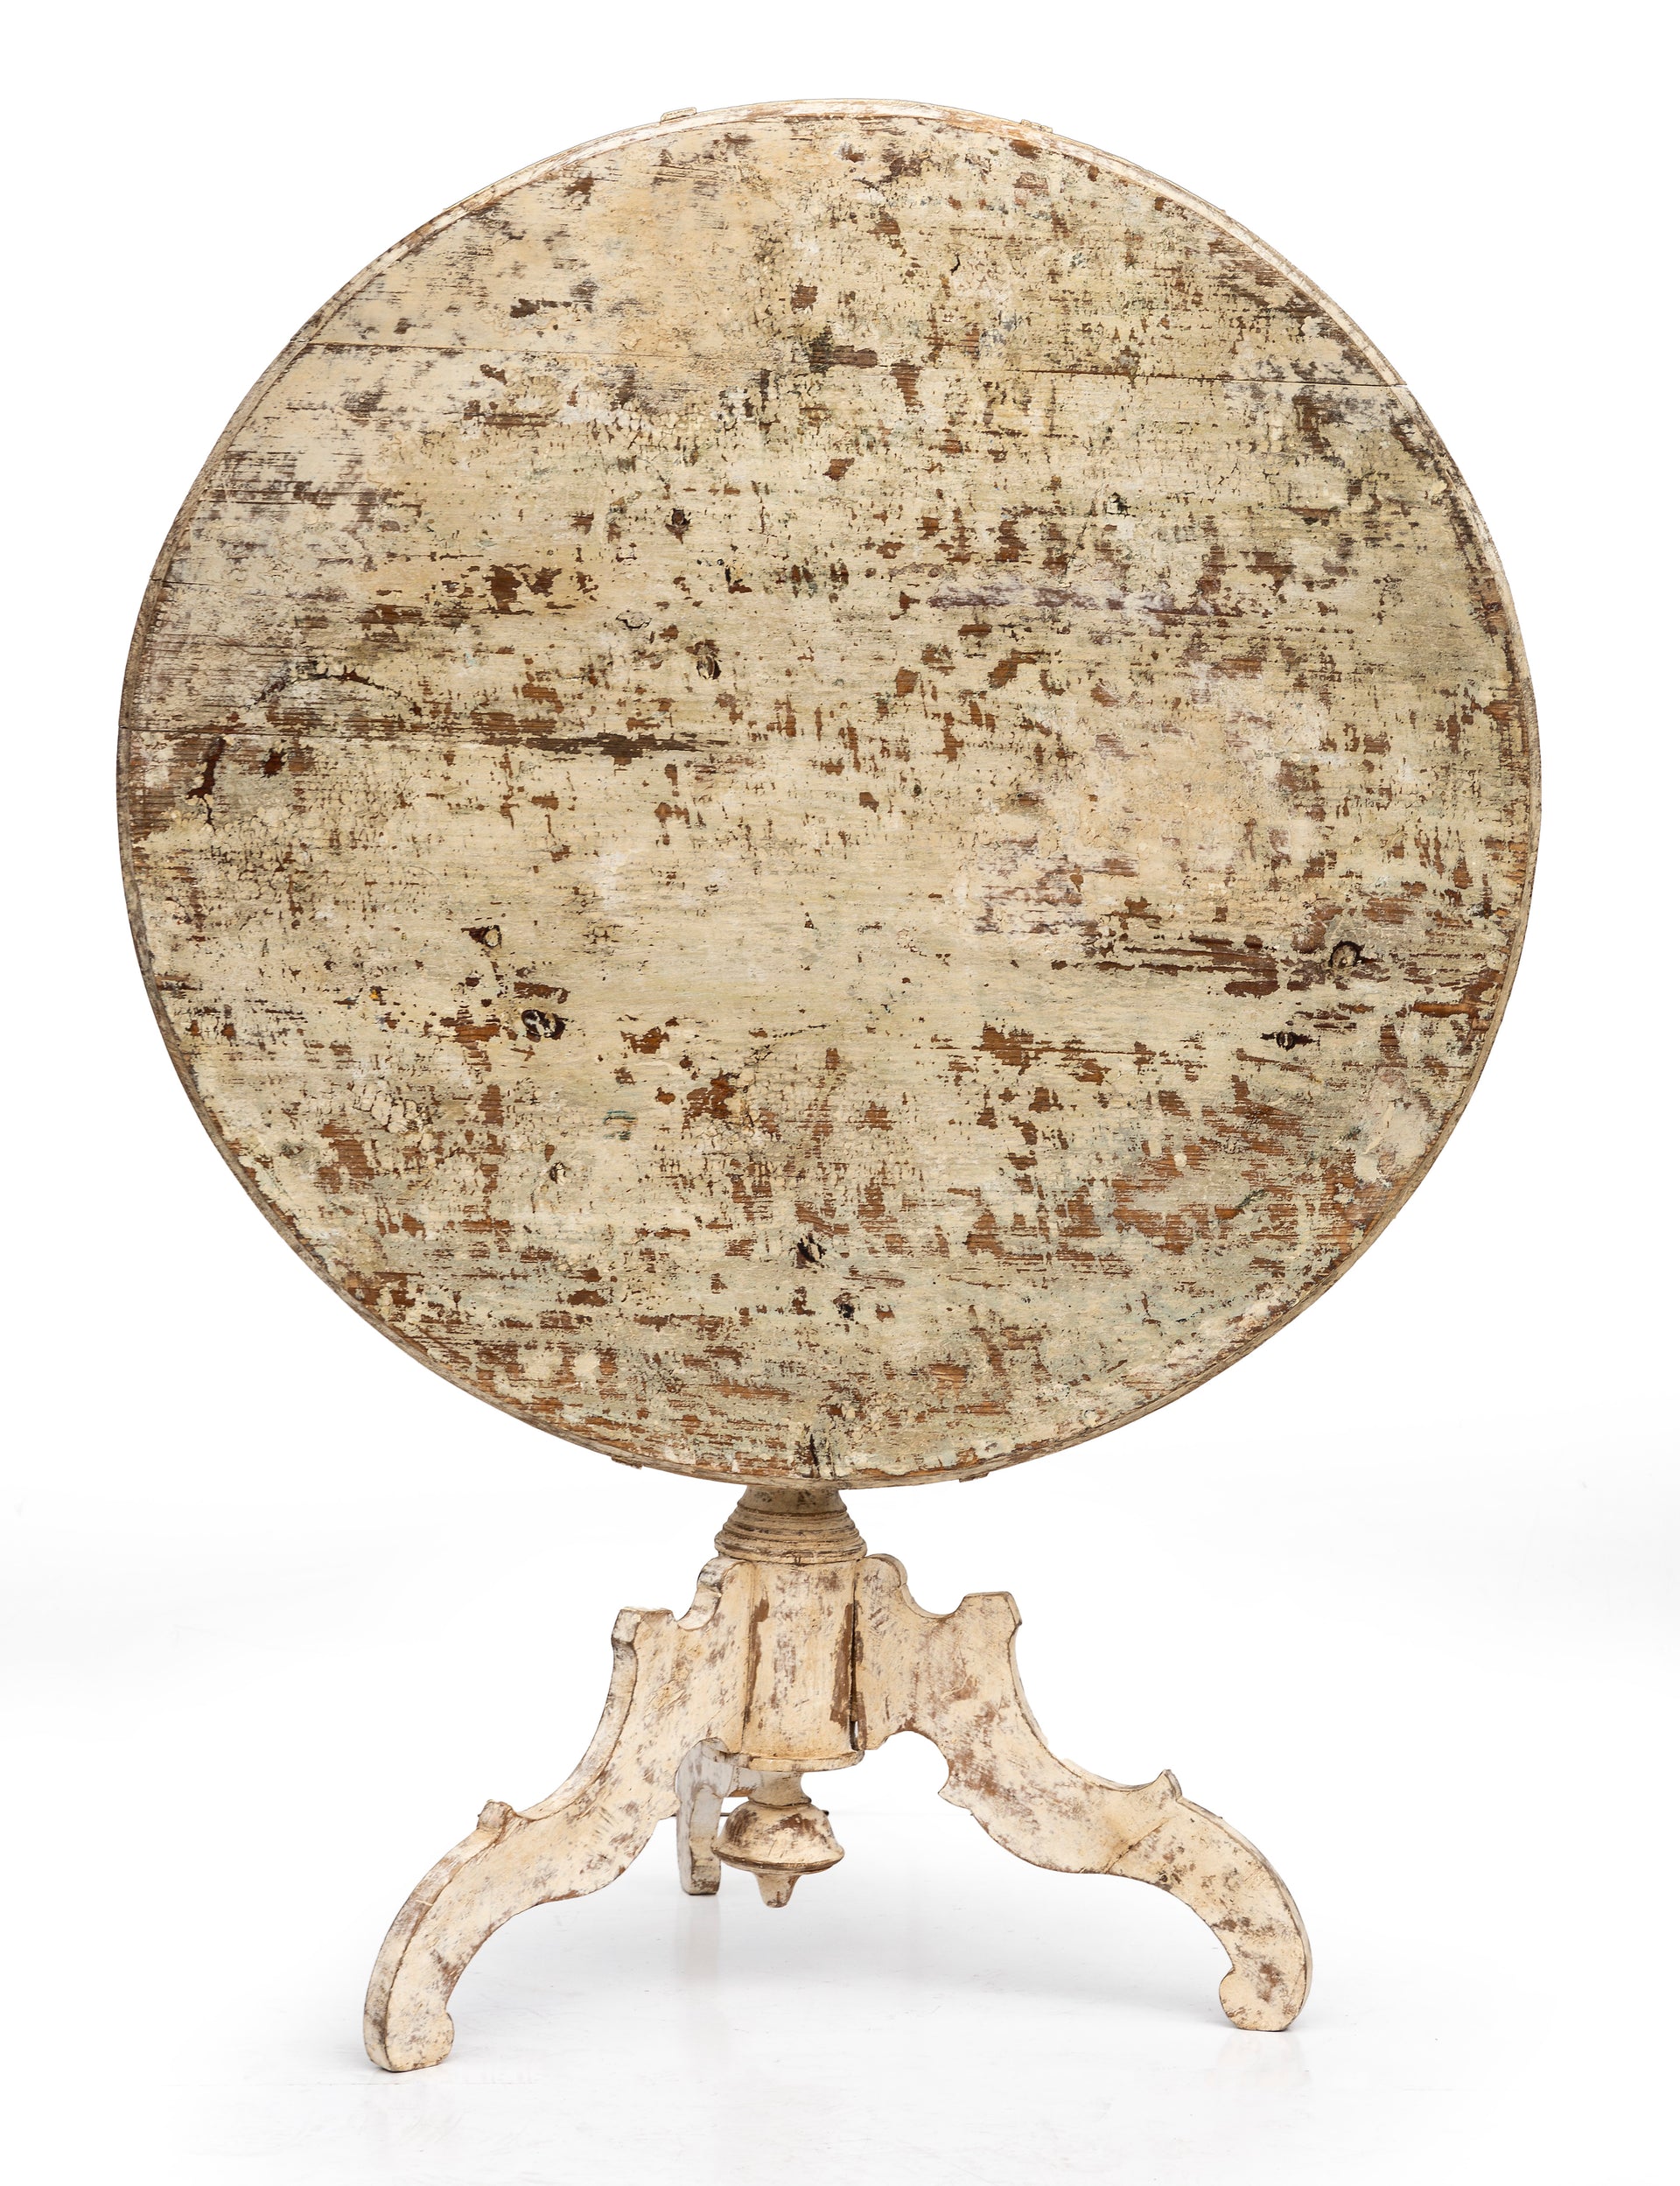 SOLD A rustic decoratively painted white timber circular tilt-top table, Swedish 19th Century